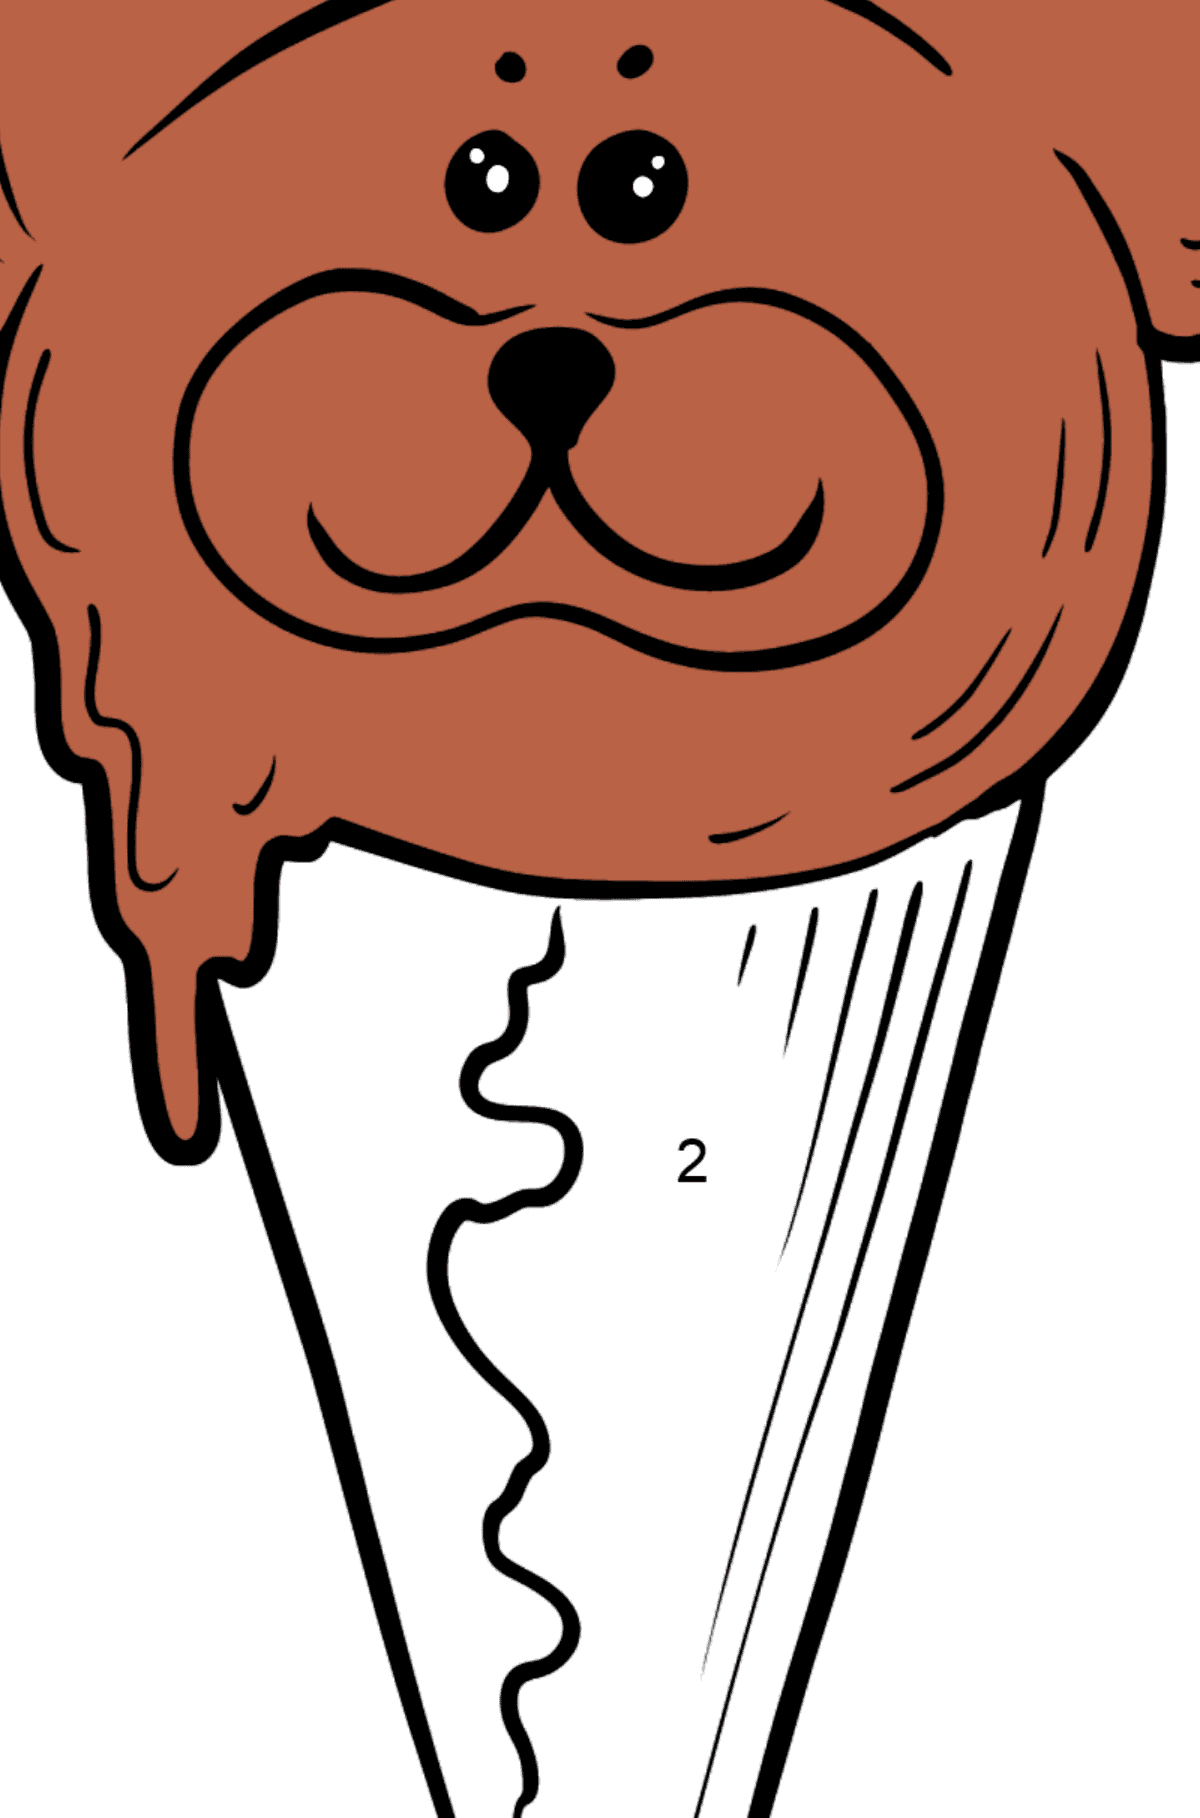 Ice Cream - Chocolate Bear with Eyes coloring page - Coloring by Numbers for Kids